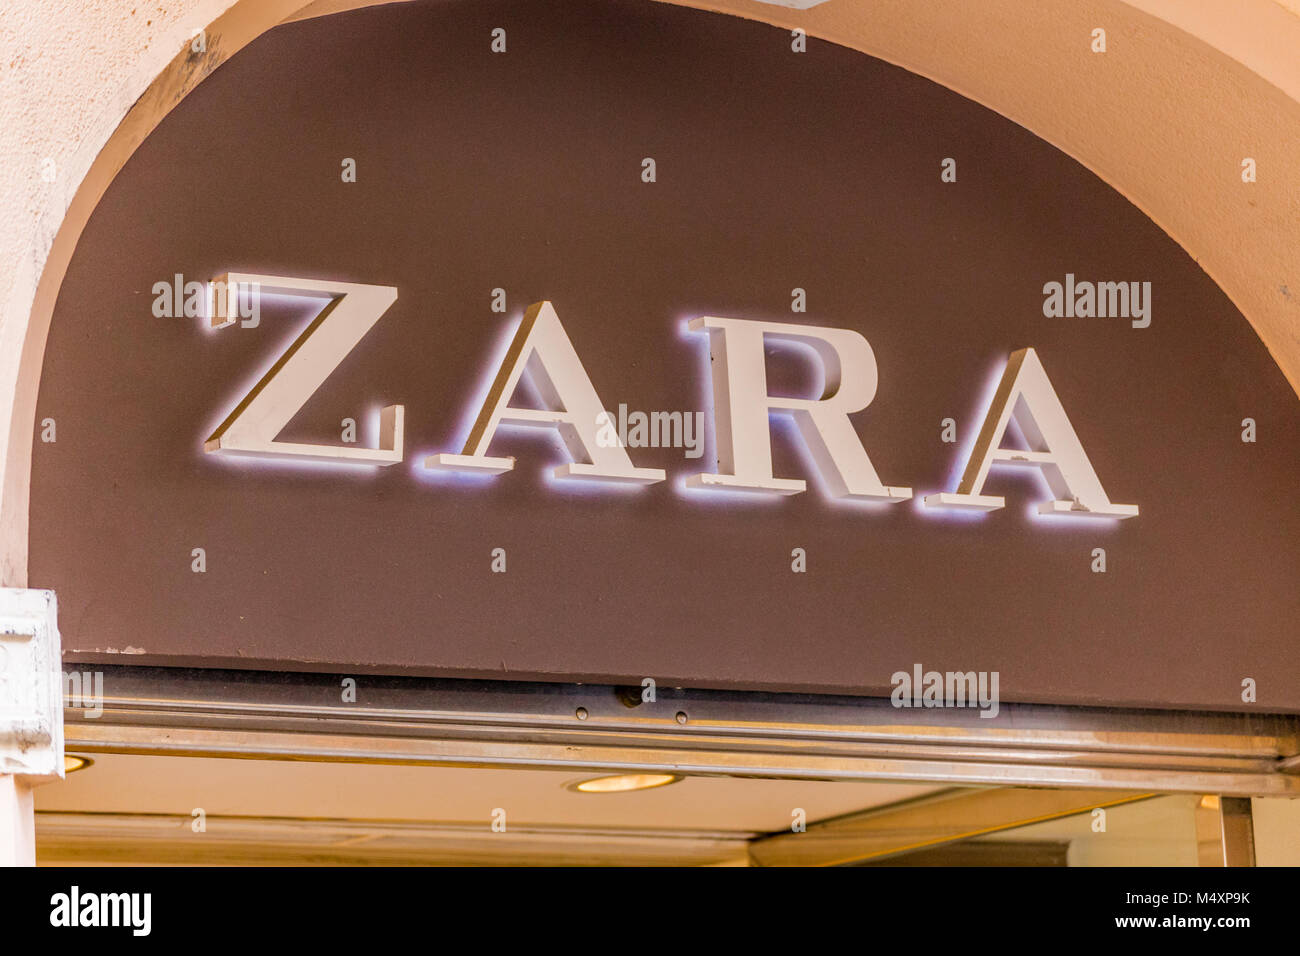 RAVENNA, ITALY - FEBRUARY 15, 2018: Zara logo sign of street shop. 65 per  cent of Zara products are made in Spain, Portugal, Turkey and north Africa  Stock Photo - Alamy